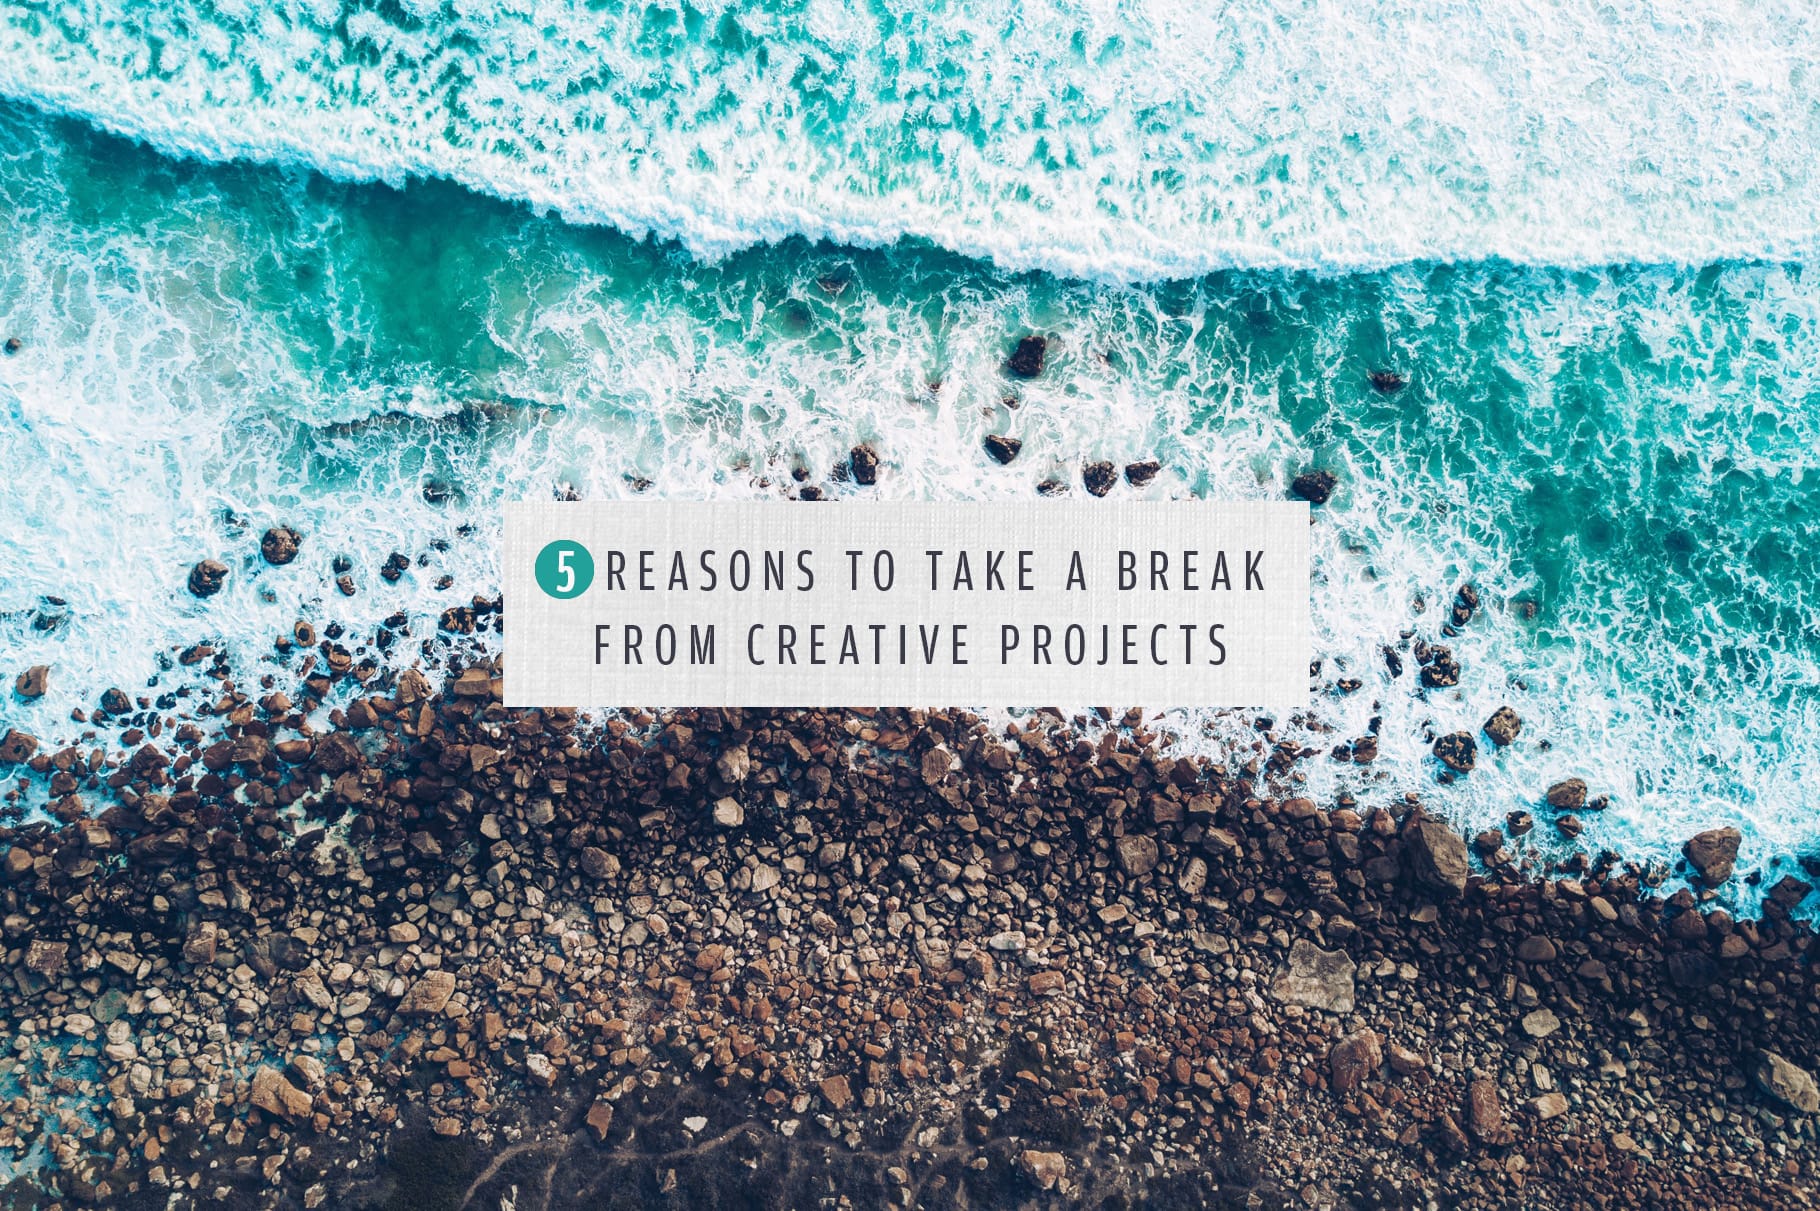 5 Reasons to Take A Break From Creative Projects